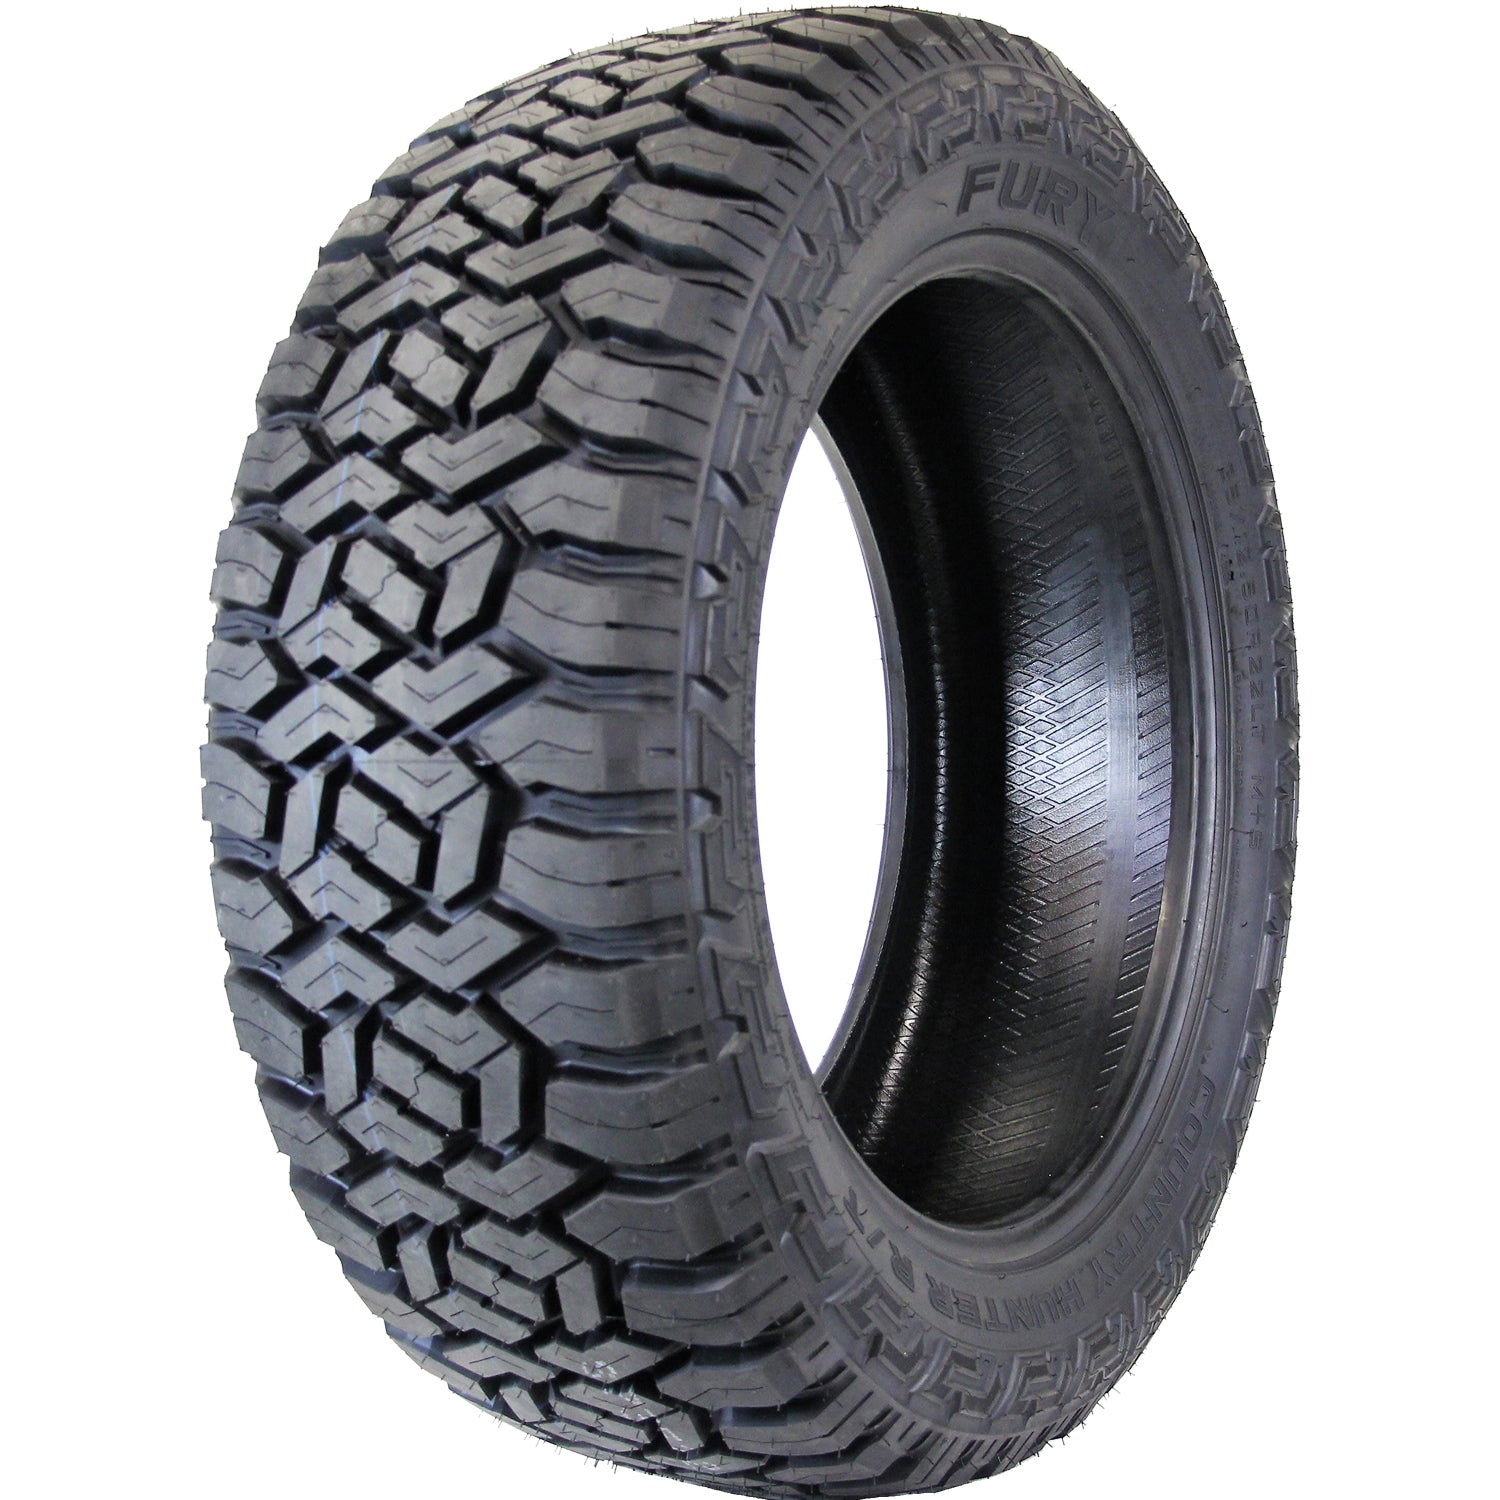 FURY OFFROAD COUNTRY HUNTER RT 37X13.50R17LT Tires